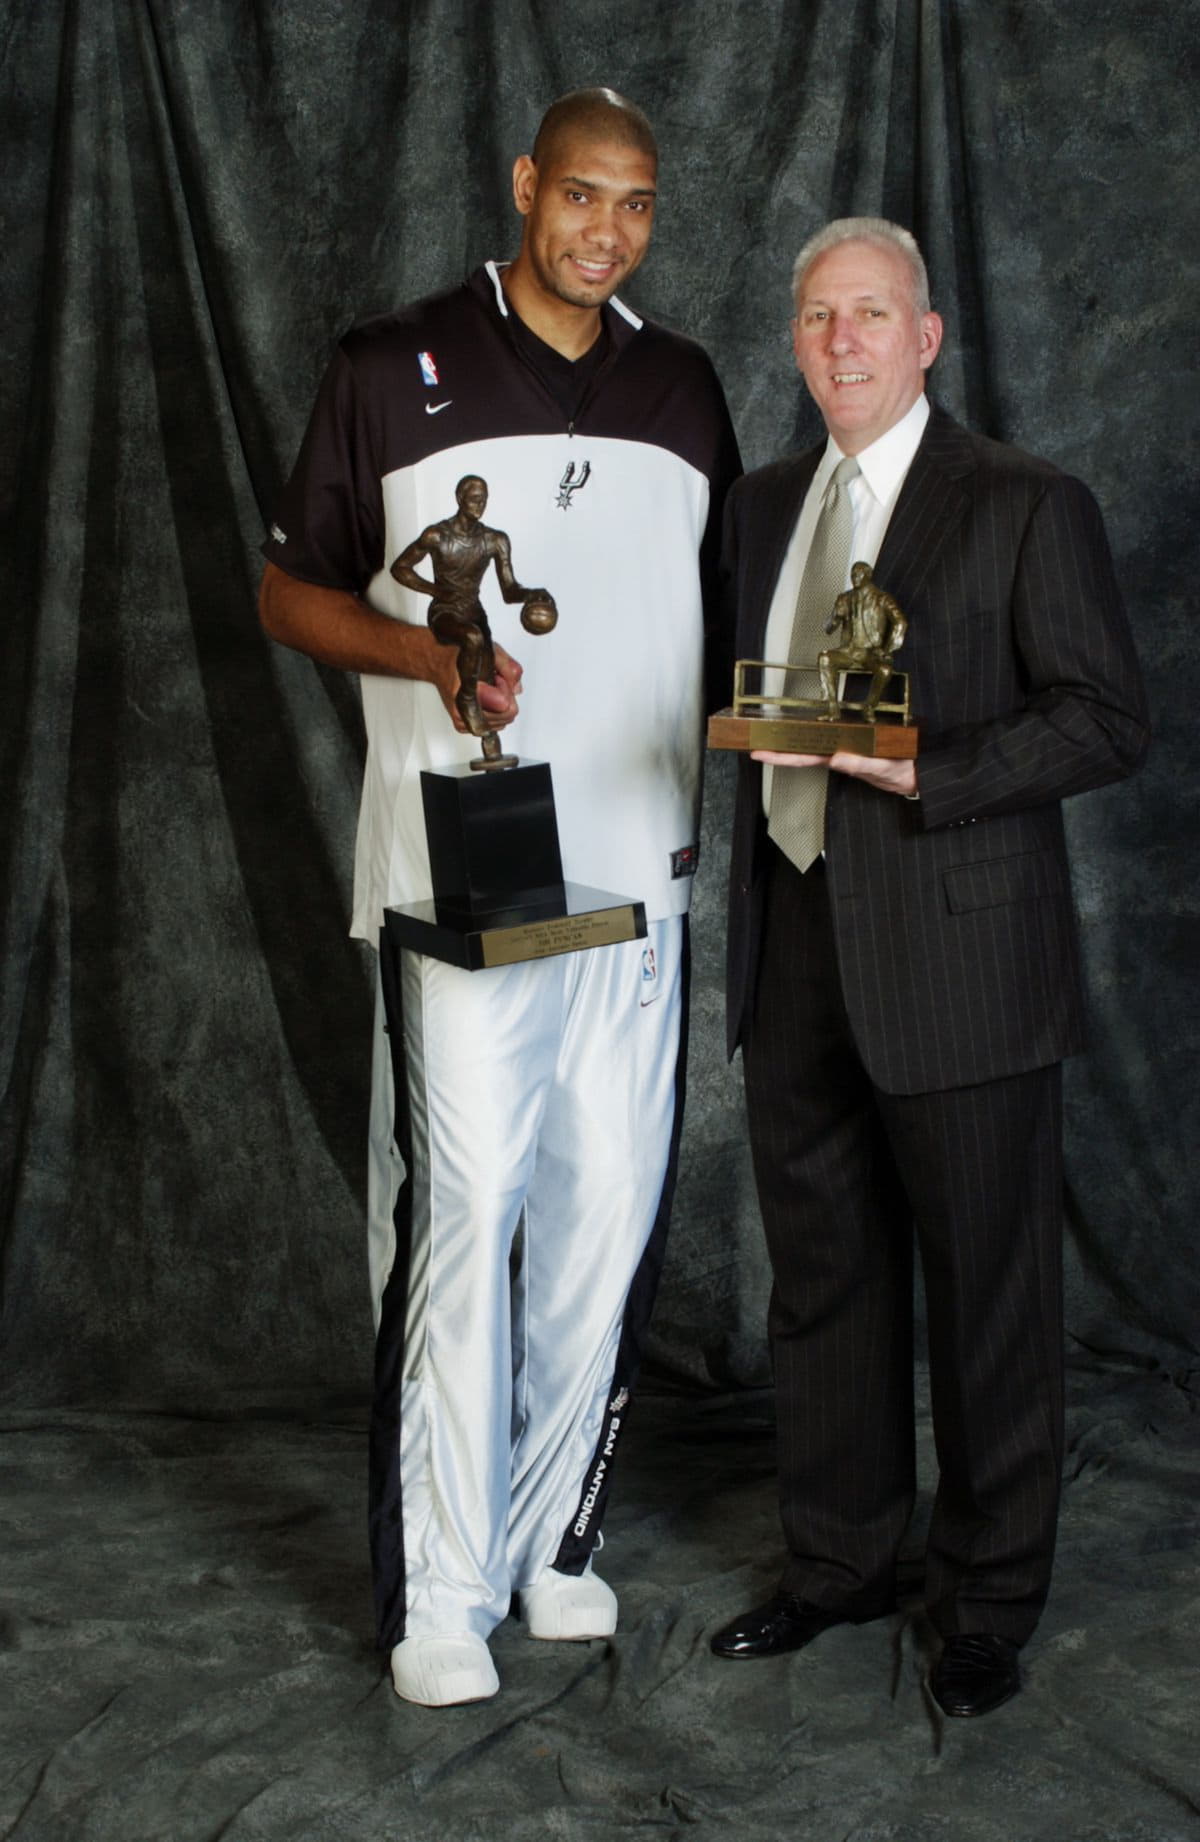 Duncan and coach Popovich pose with MVP and Coach of the Year Award